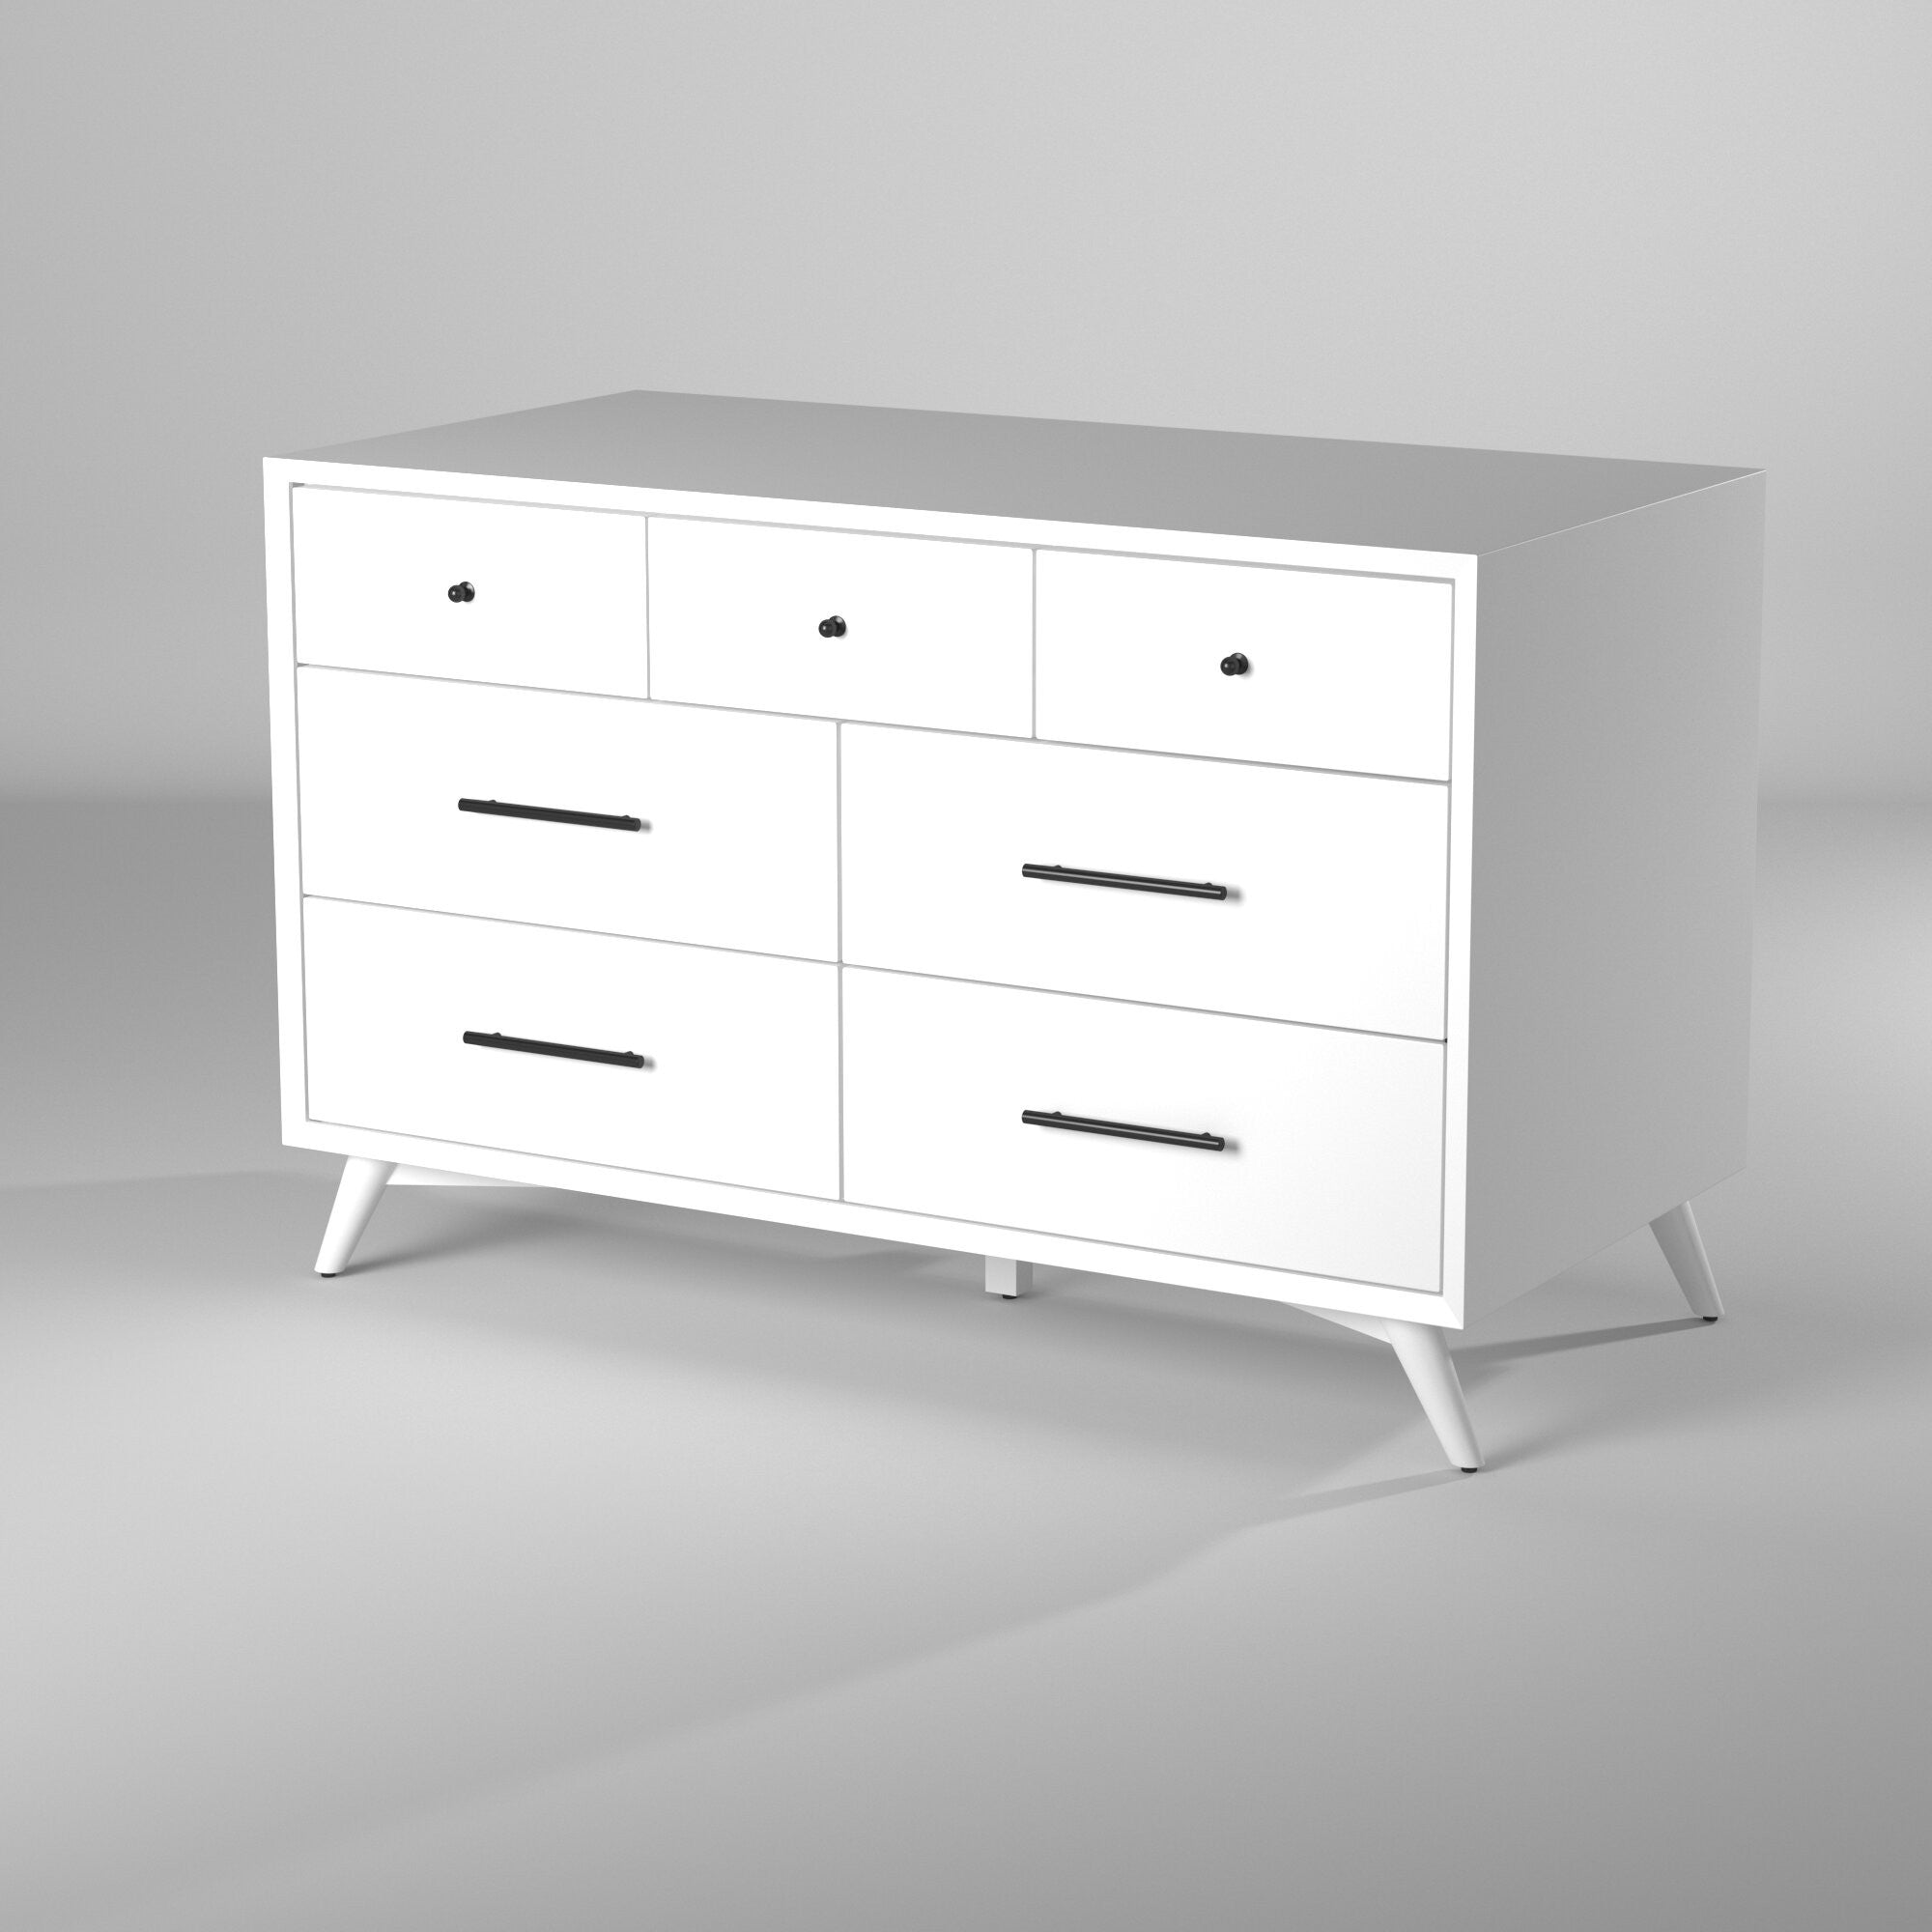 56" White Solid Wood Seven Drawer Double Dresser